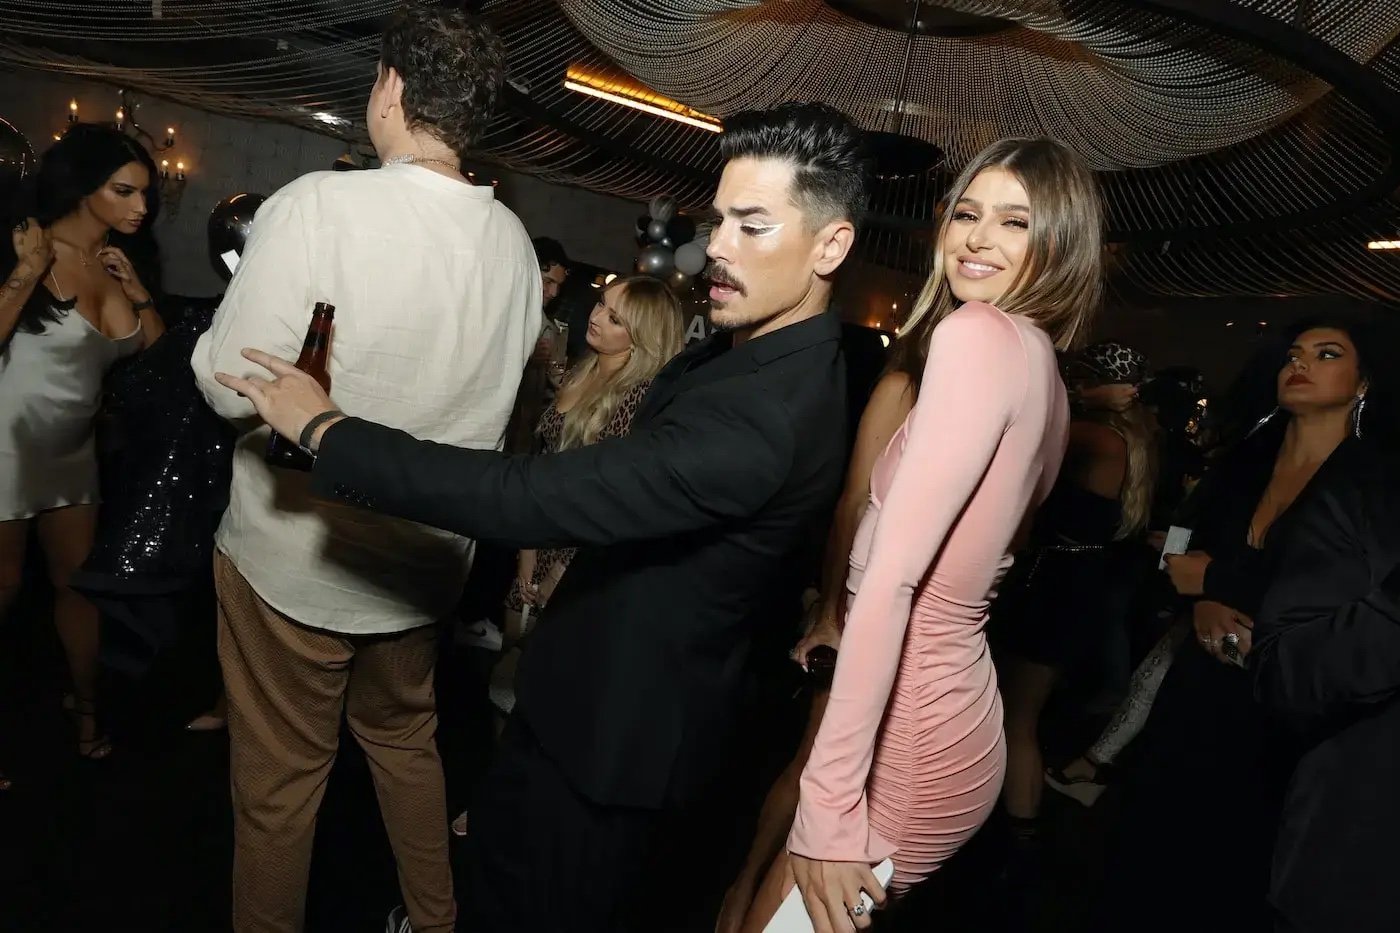 'Vanderpump Rules' cheaters Tom Sandoval and Raquel Leviss dance together at an event.